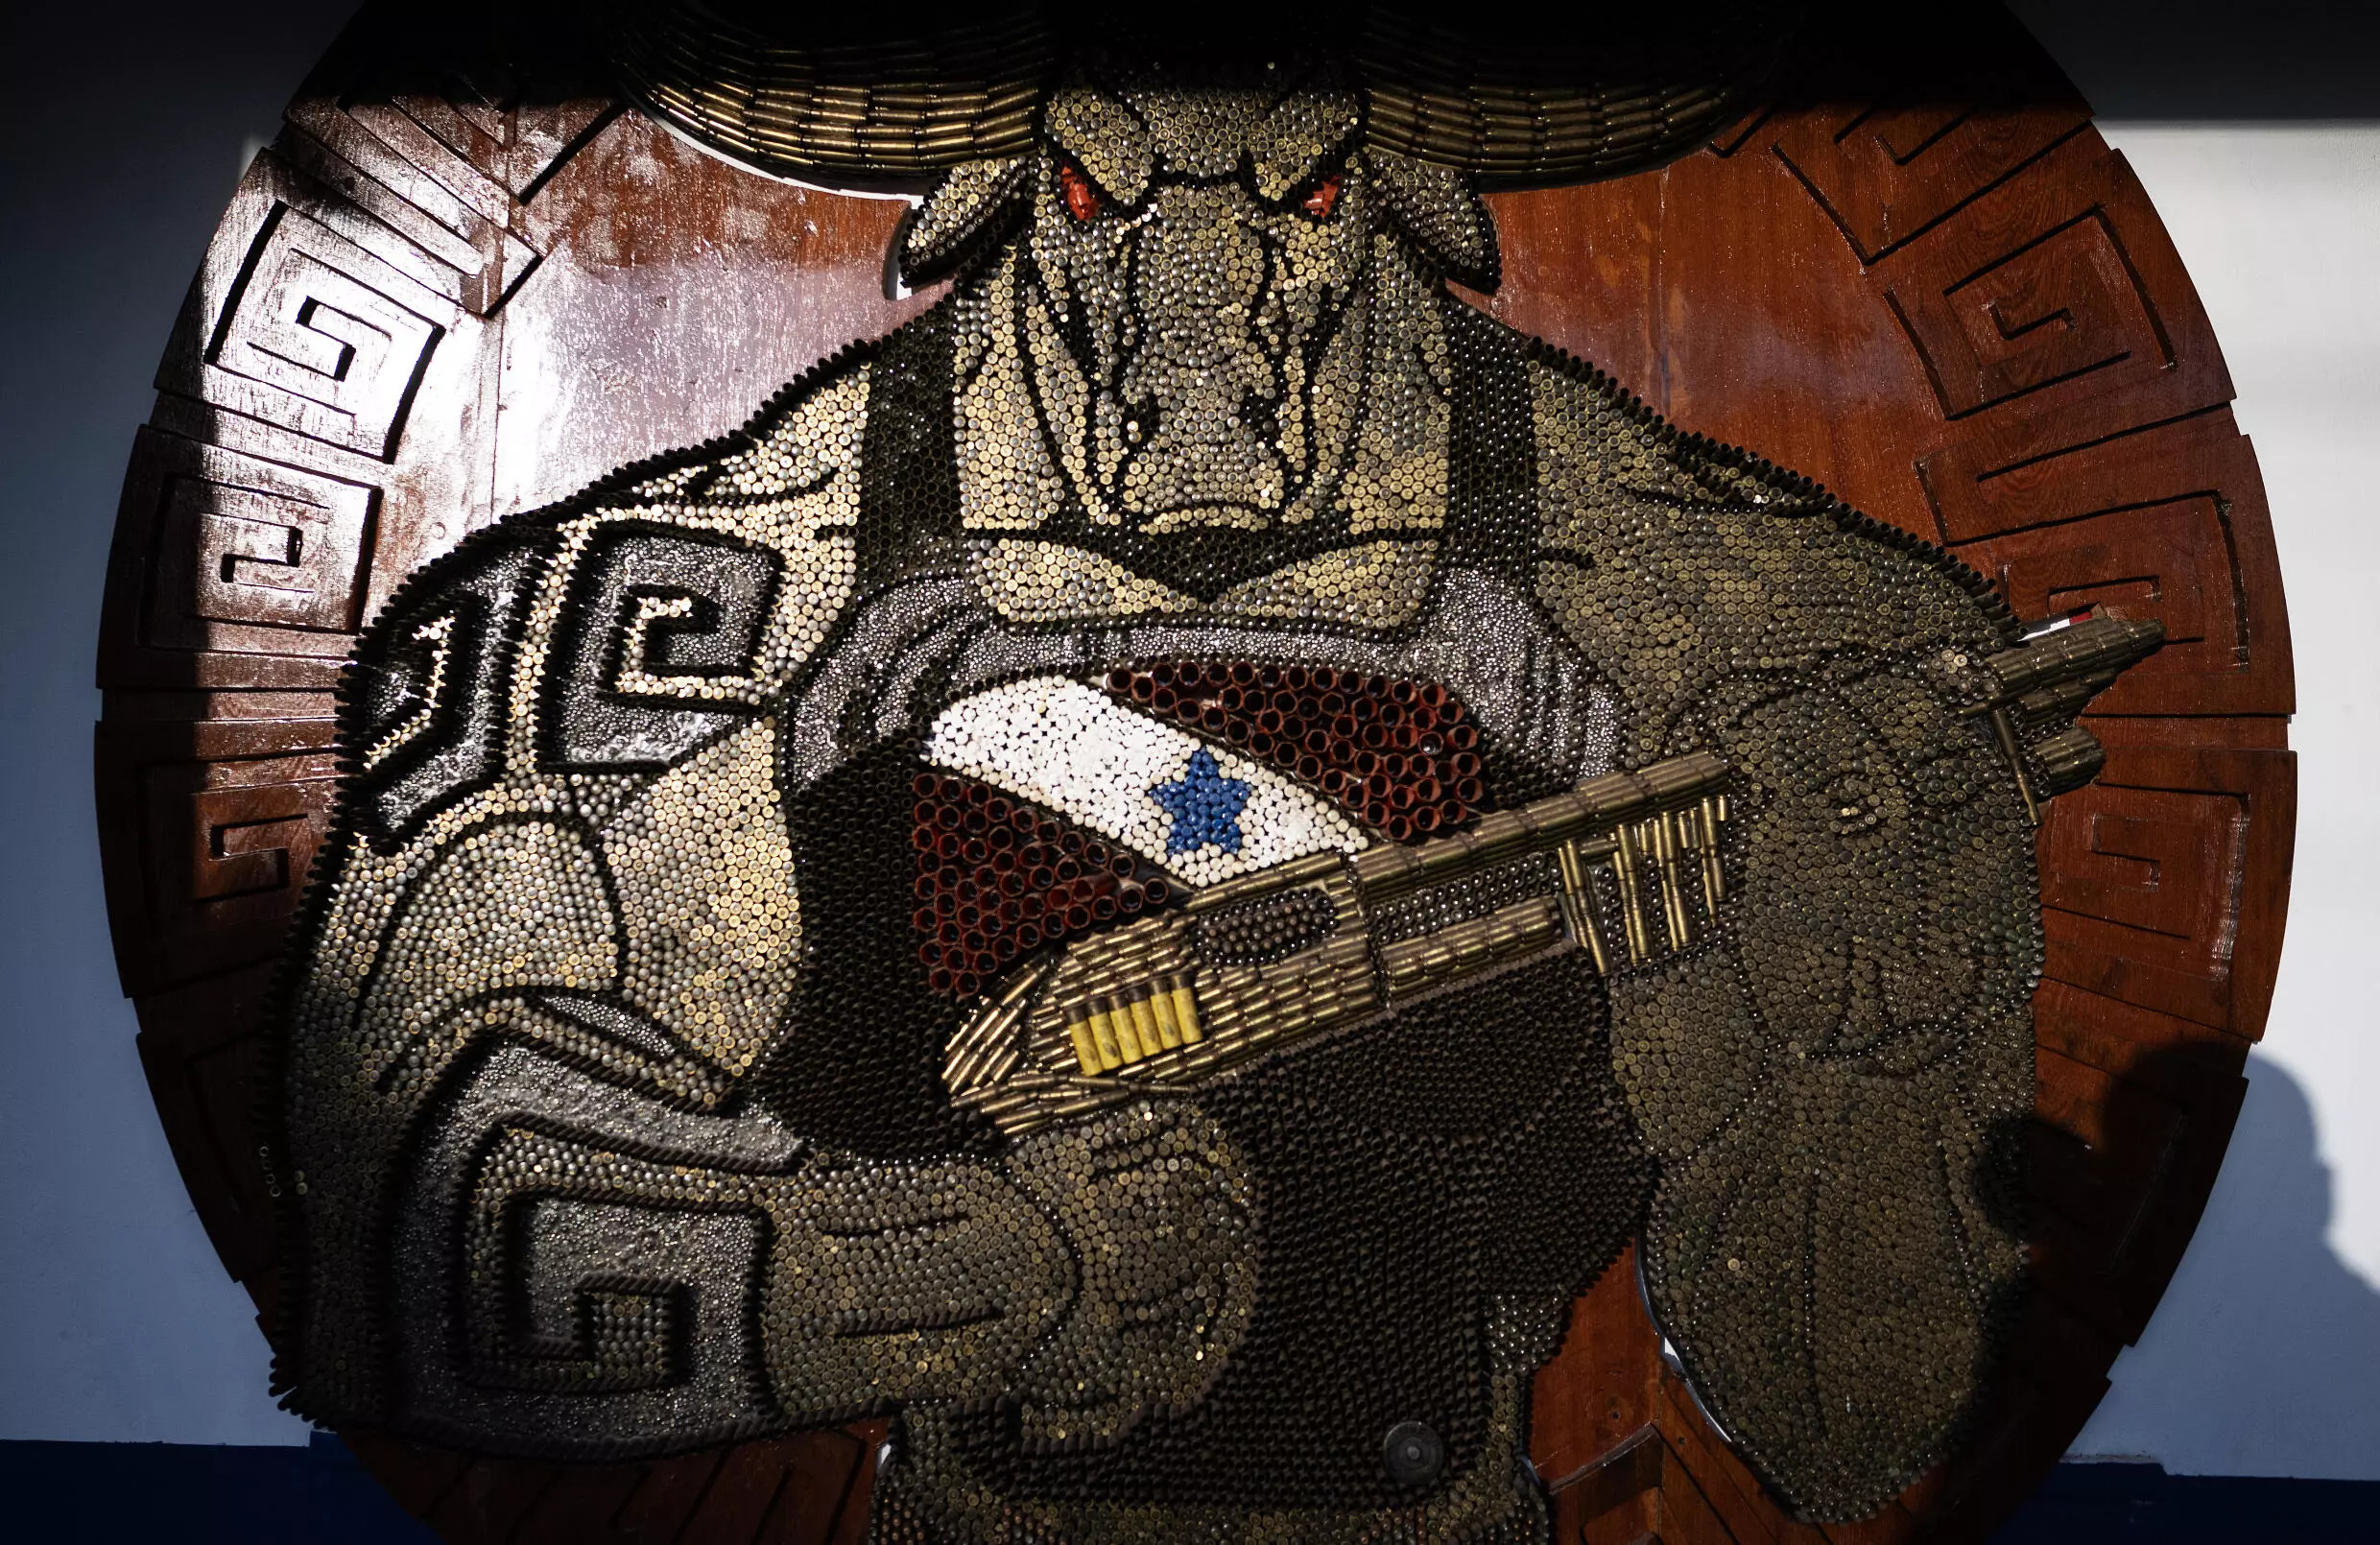 The Soure military police unit's headquarters is adorned with a plaque made of bullet casings depicting a muscular buffalo holding a shotgun. Photo: AFP